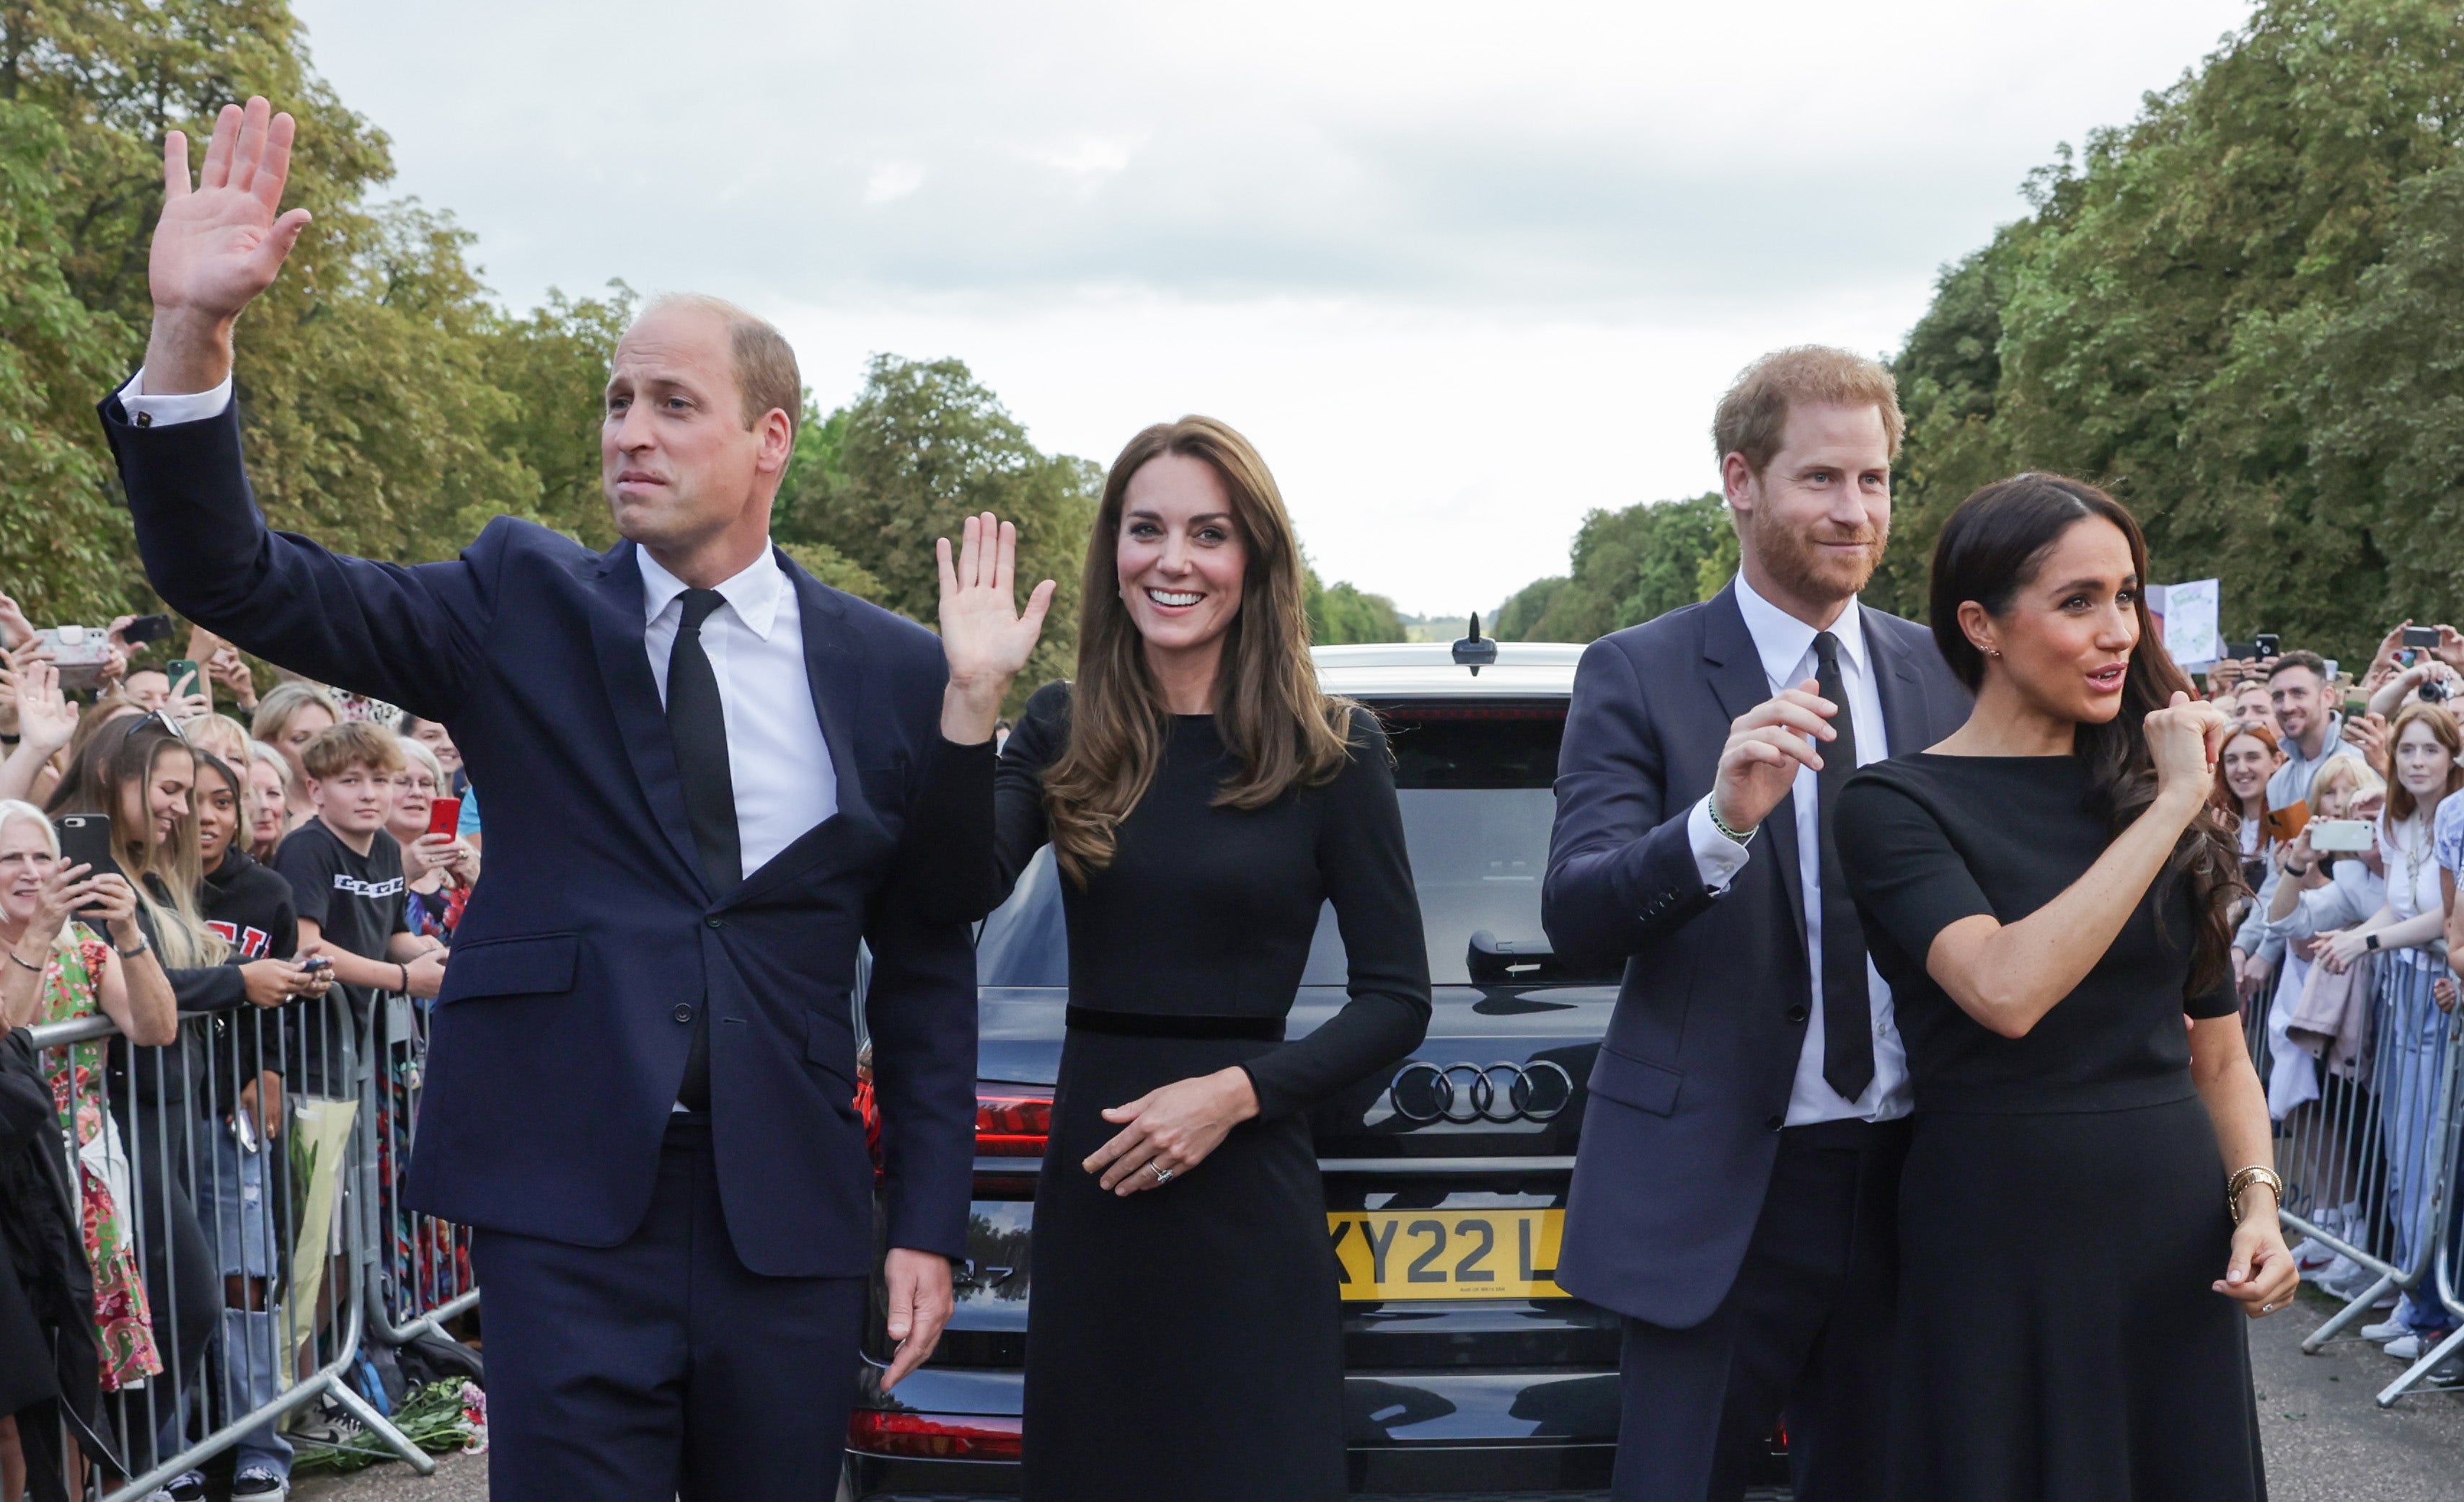 In viral video, social media users criticized the differences between how Prince Harry and Prince William treated their wives before entering their car. (Chris Jackson)